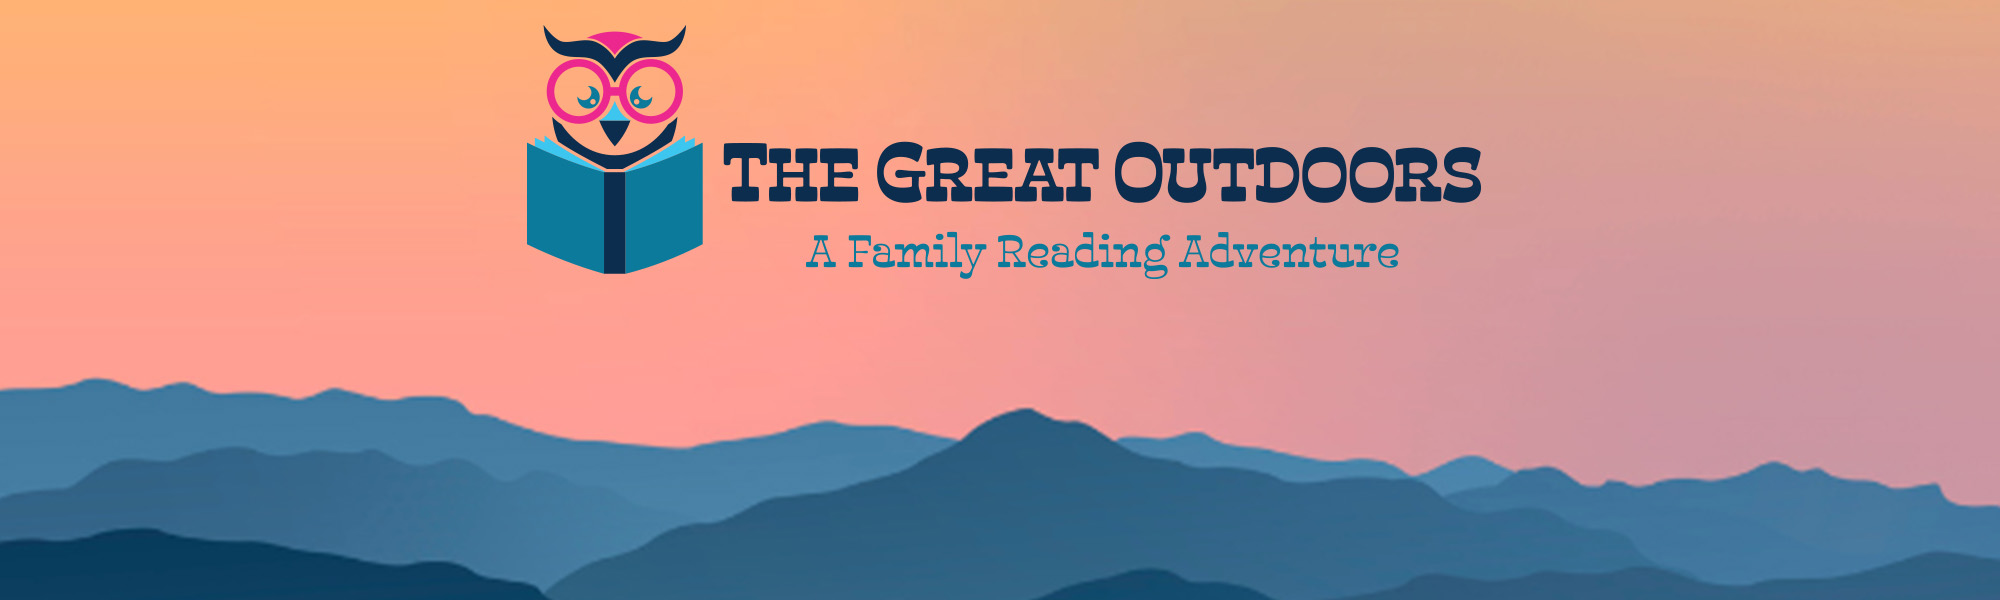 The Great Outdoors: A Family Reading Adventure